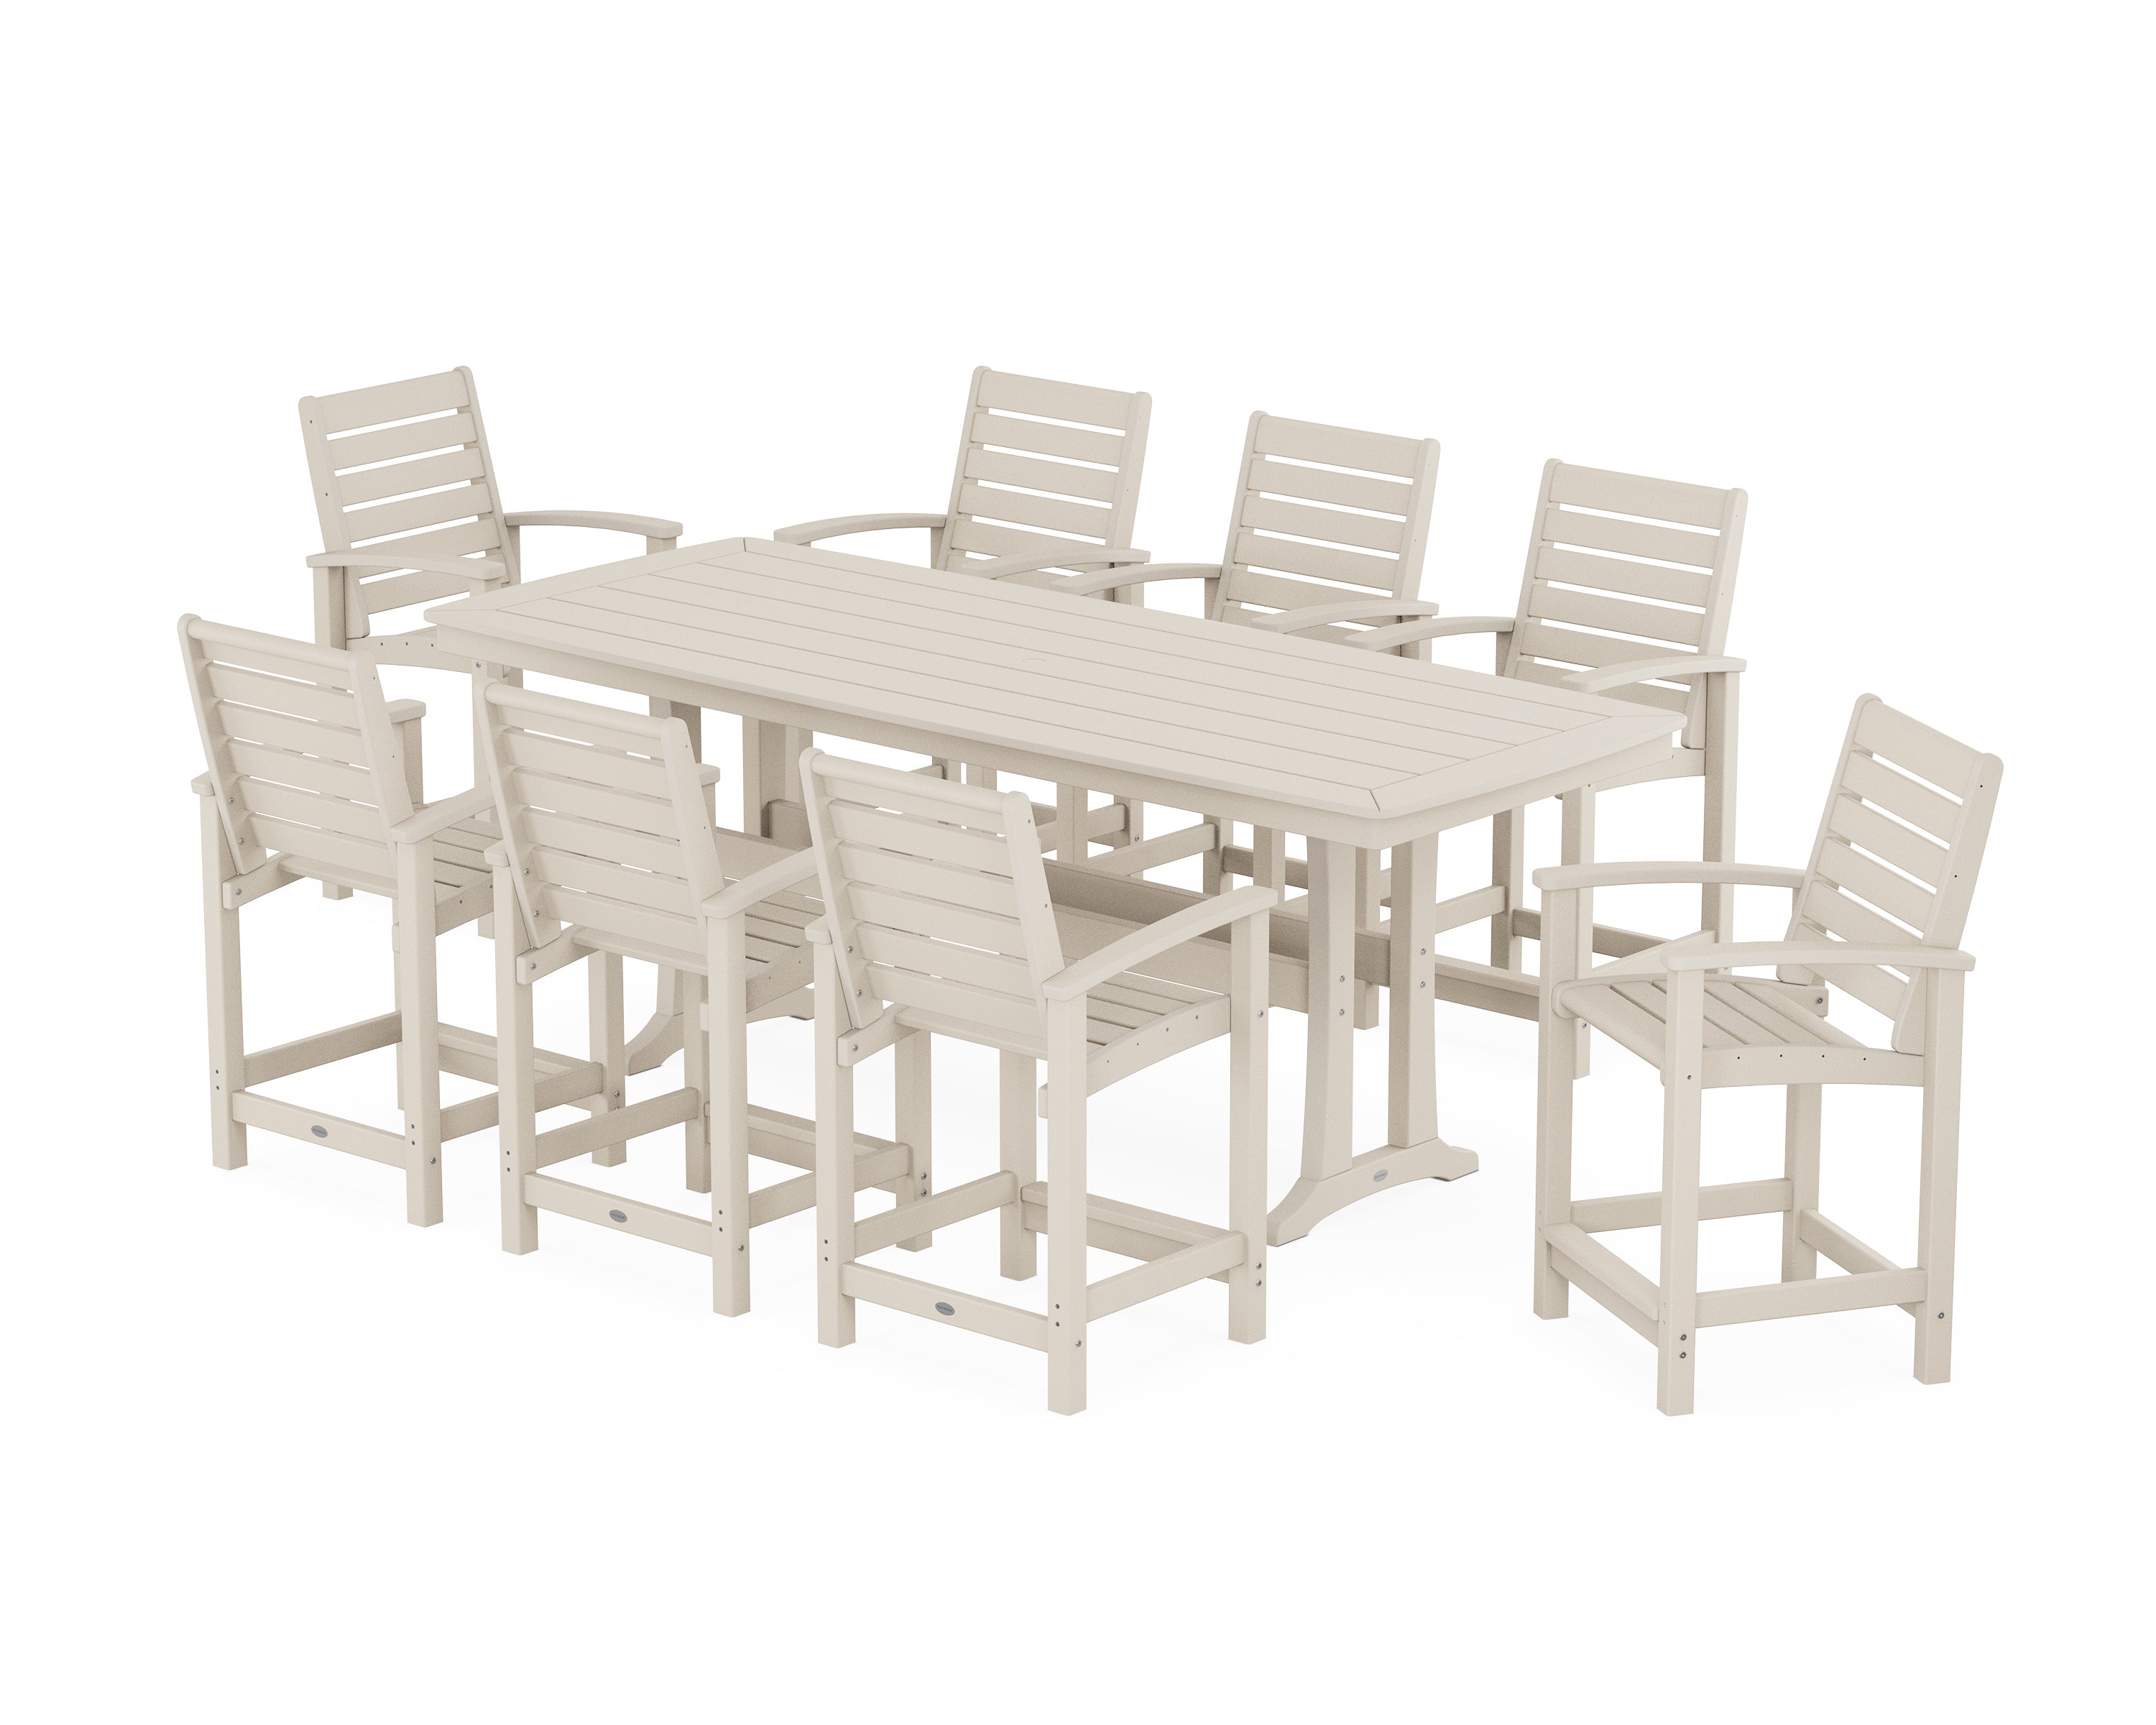 POLYWOOD® Signature 9-Piece Counter Set with Trestle Legs in Sand